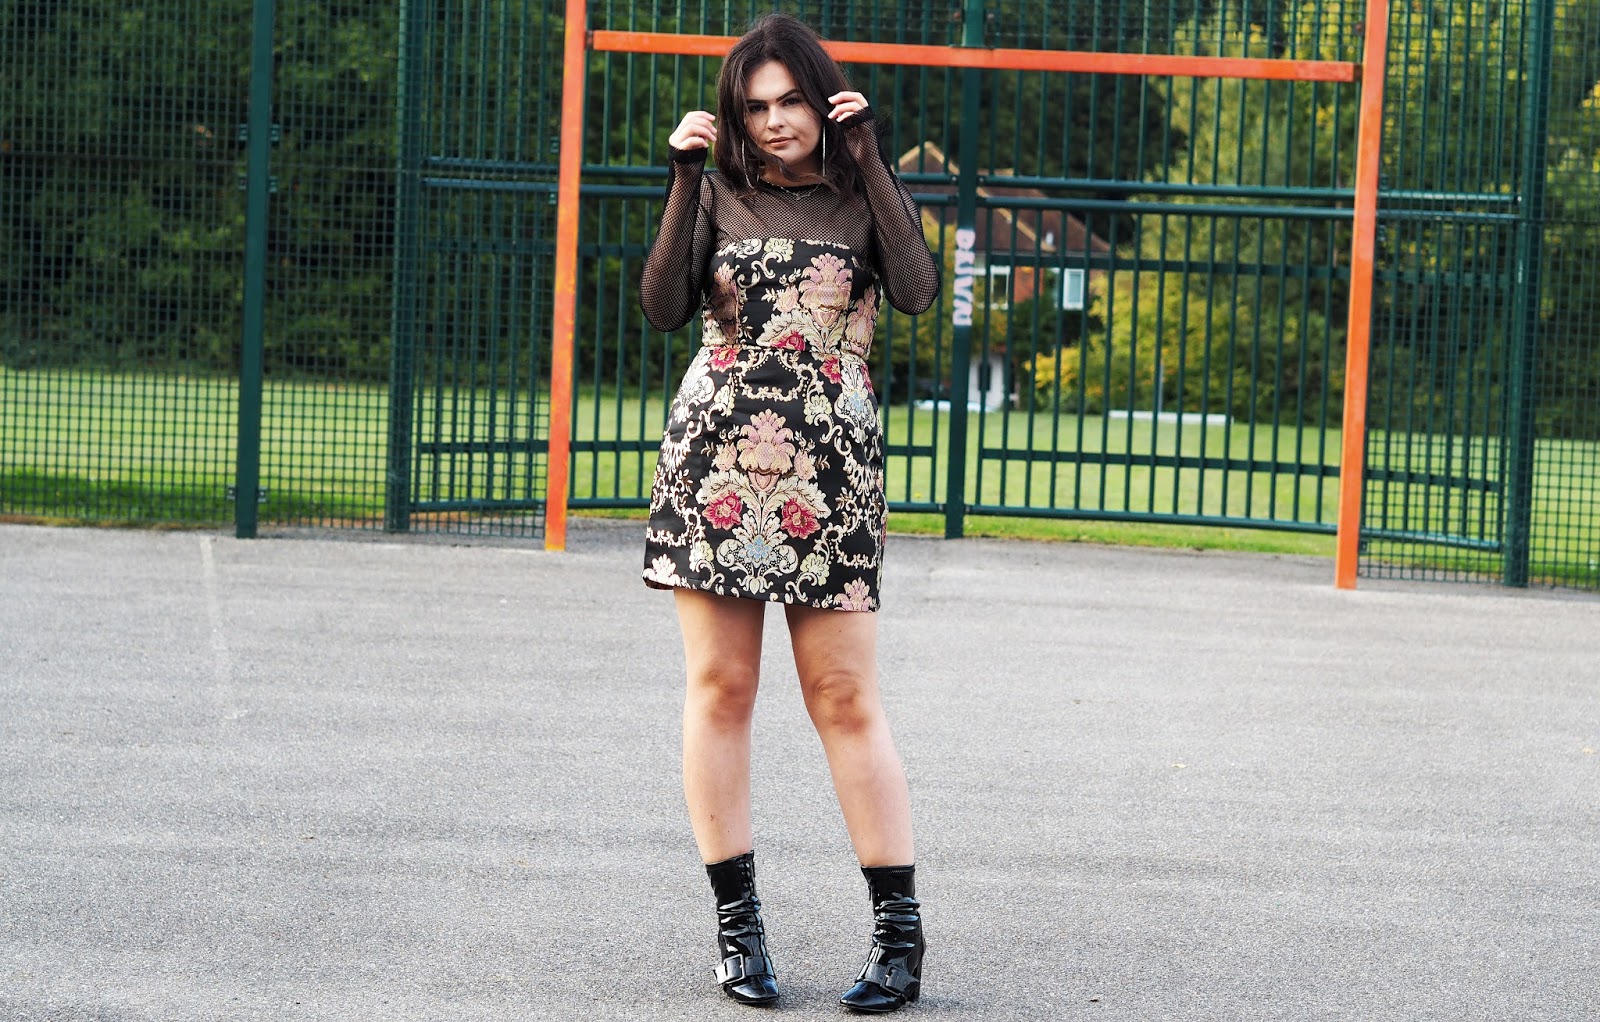 fATE BLACK FLORAL BROCADE BANDEAU DRESS, inthestyle dress, nakd fashion mesh top, nasty gals do it better, 7 things you tell yourself in your twenties, uk fashion blogger